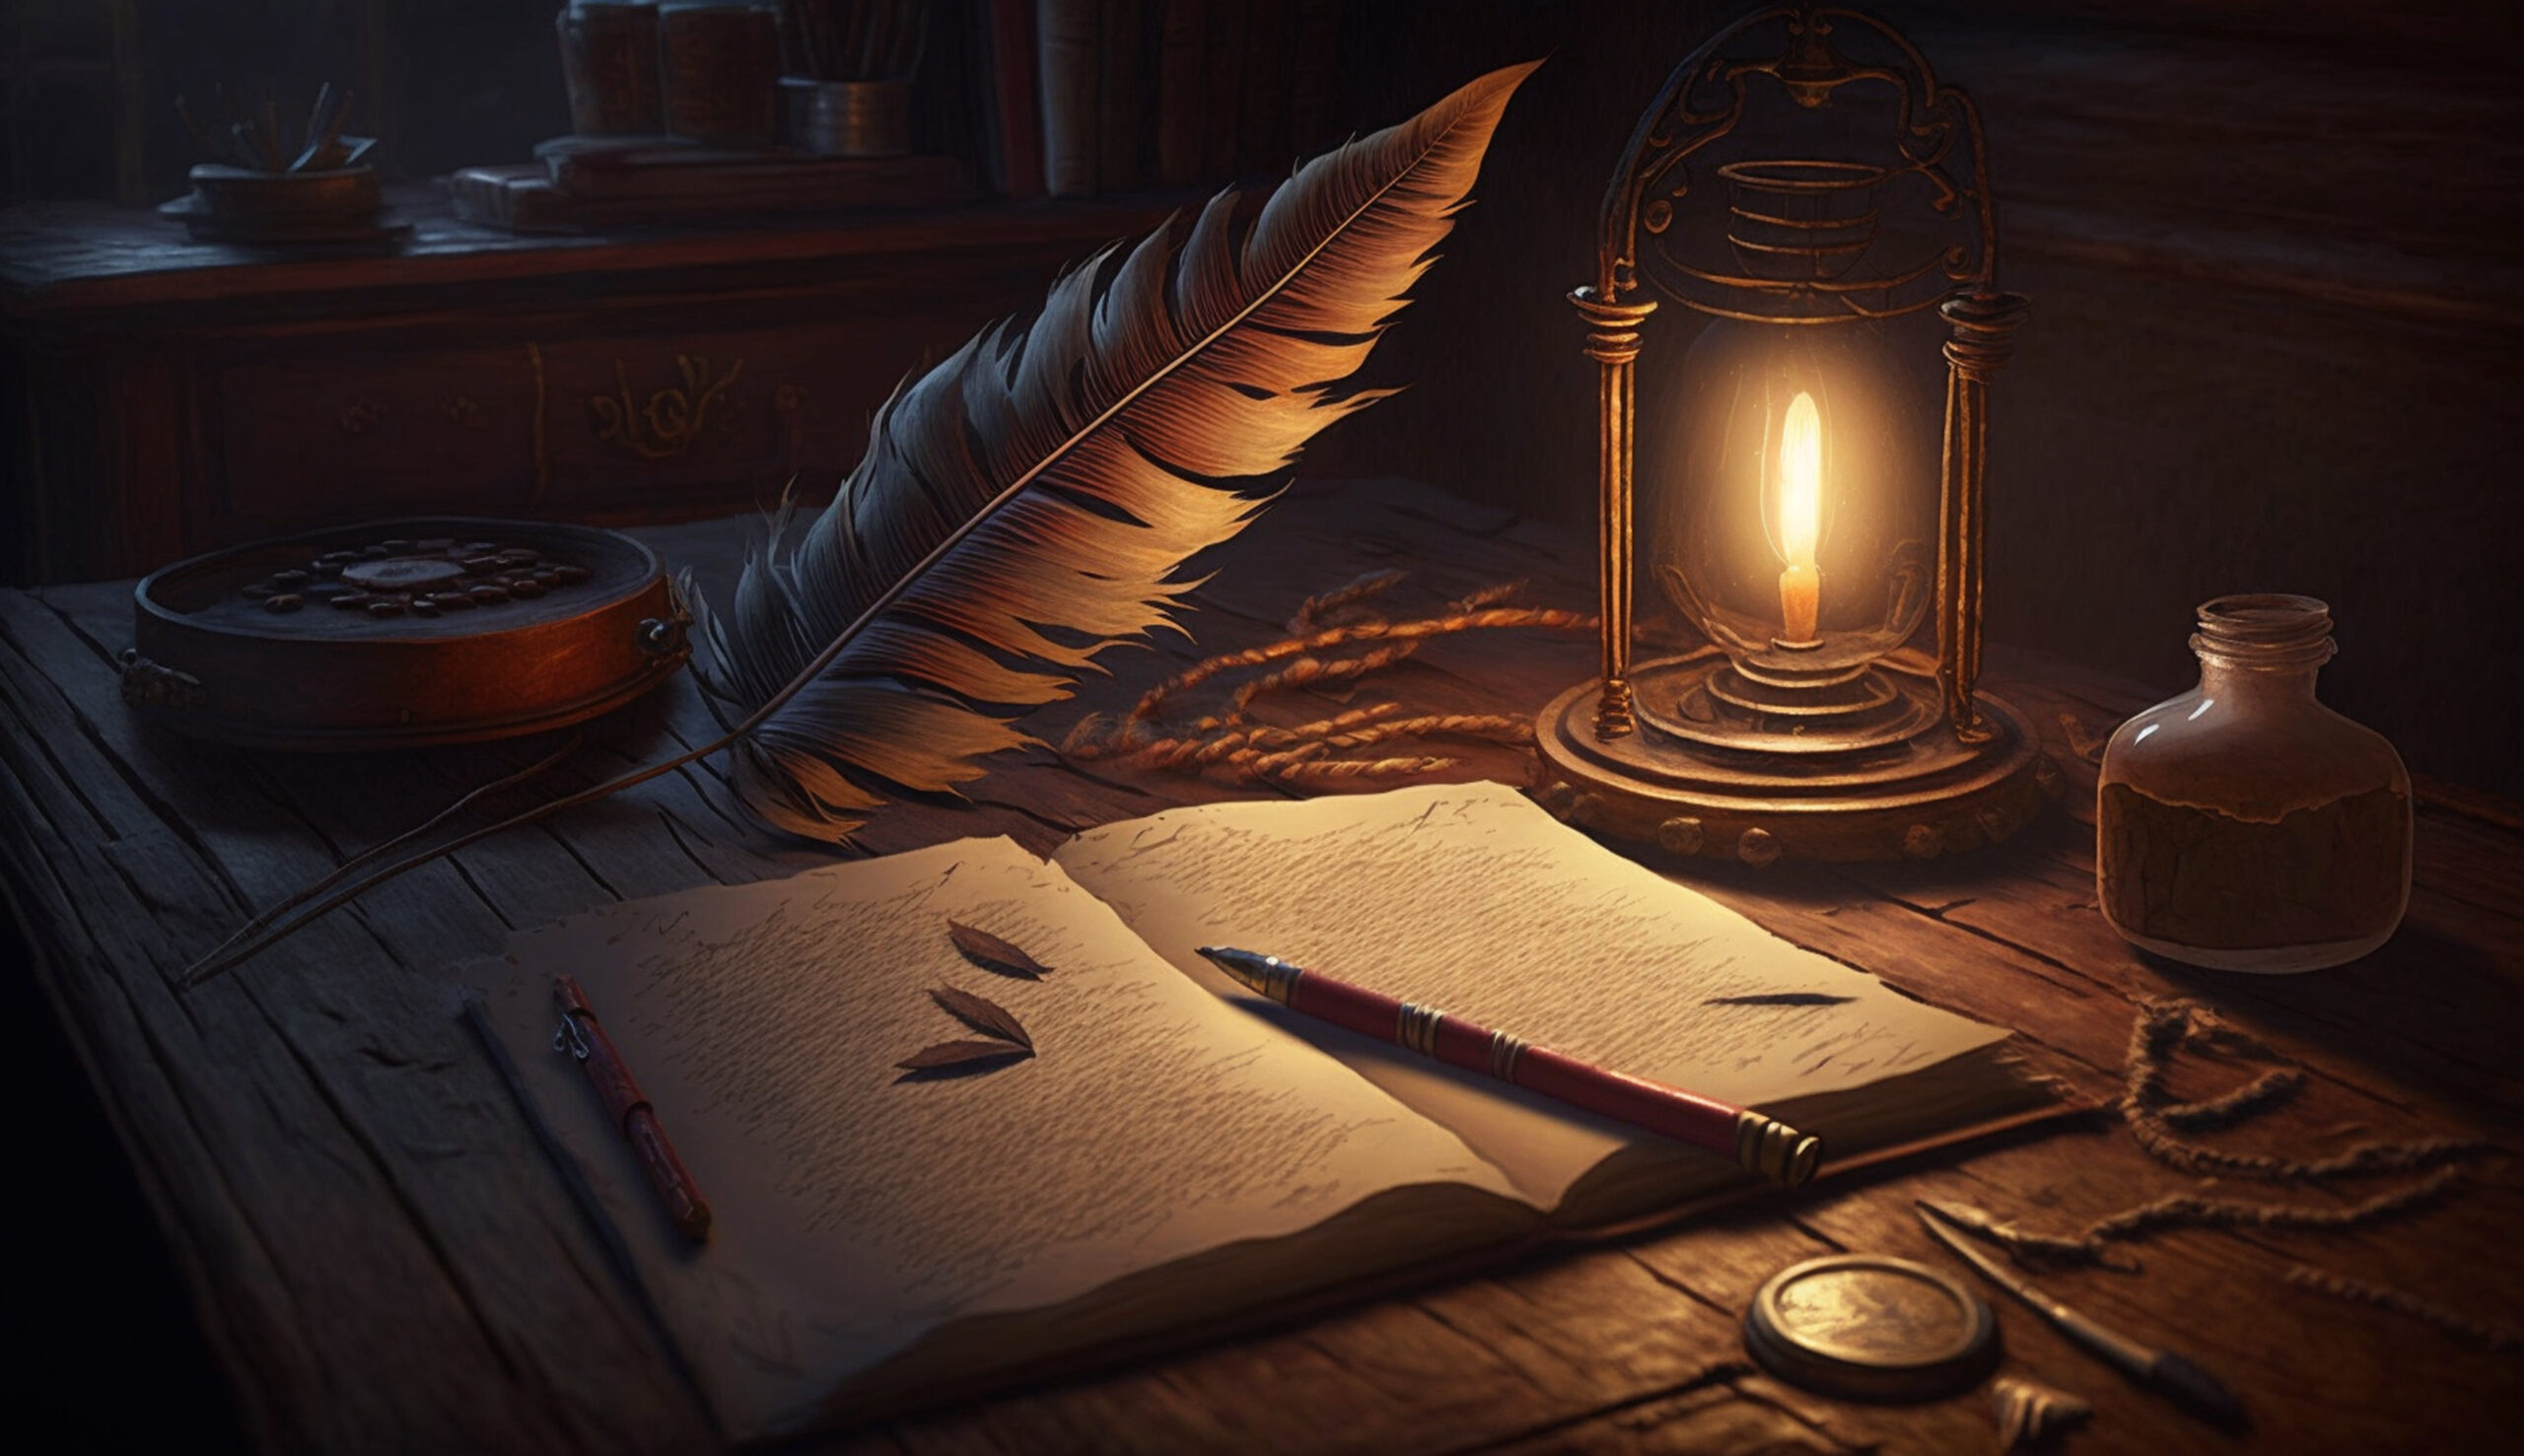 A lantern and writing instruments, both old and new.